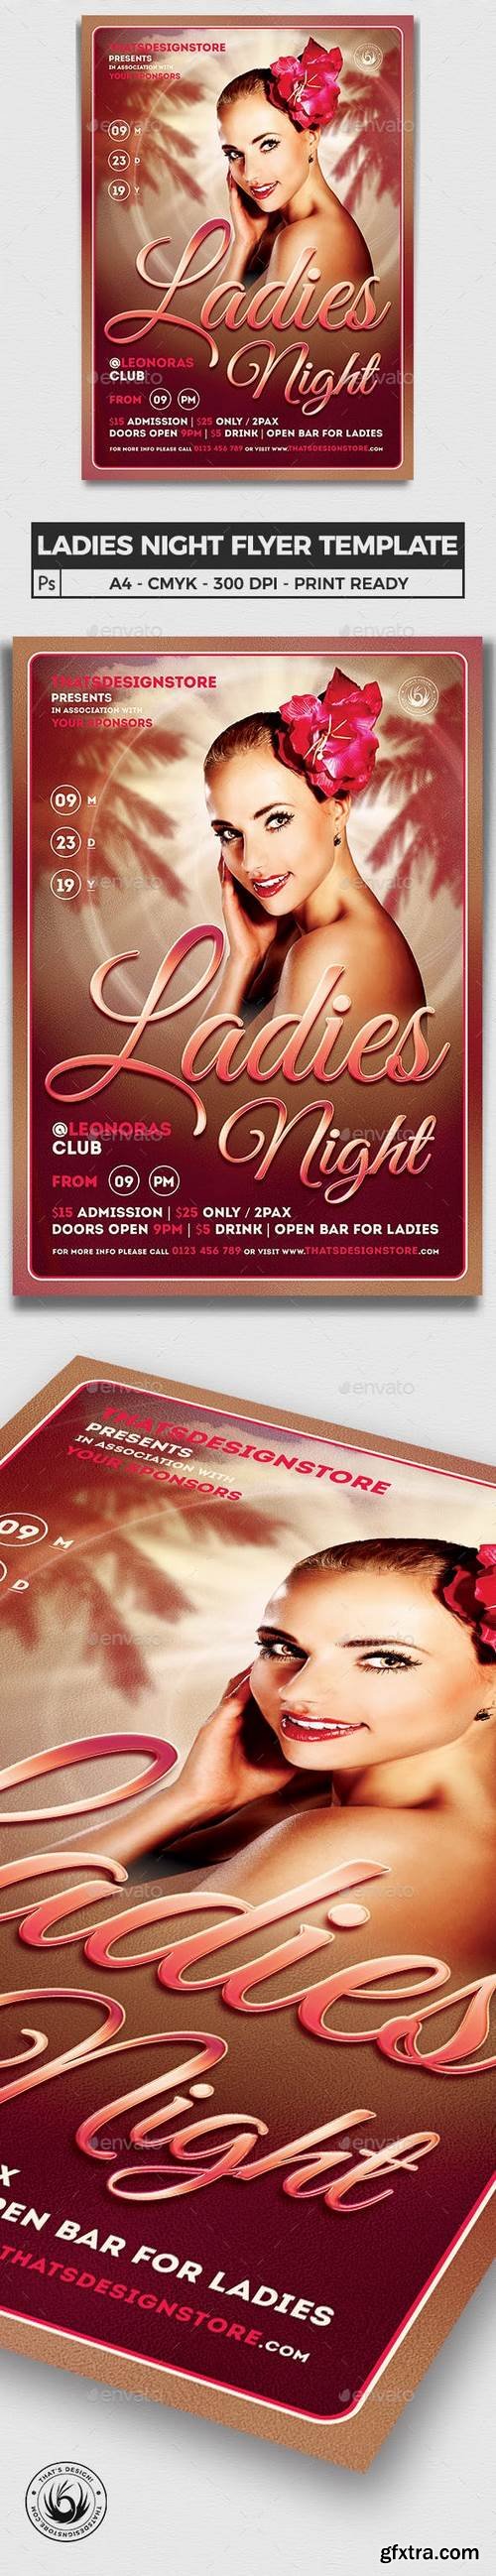 Graphicriver - Sensual Ladies Night Flyer Template 6331341- Updated !